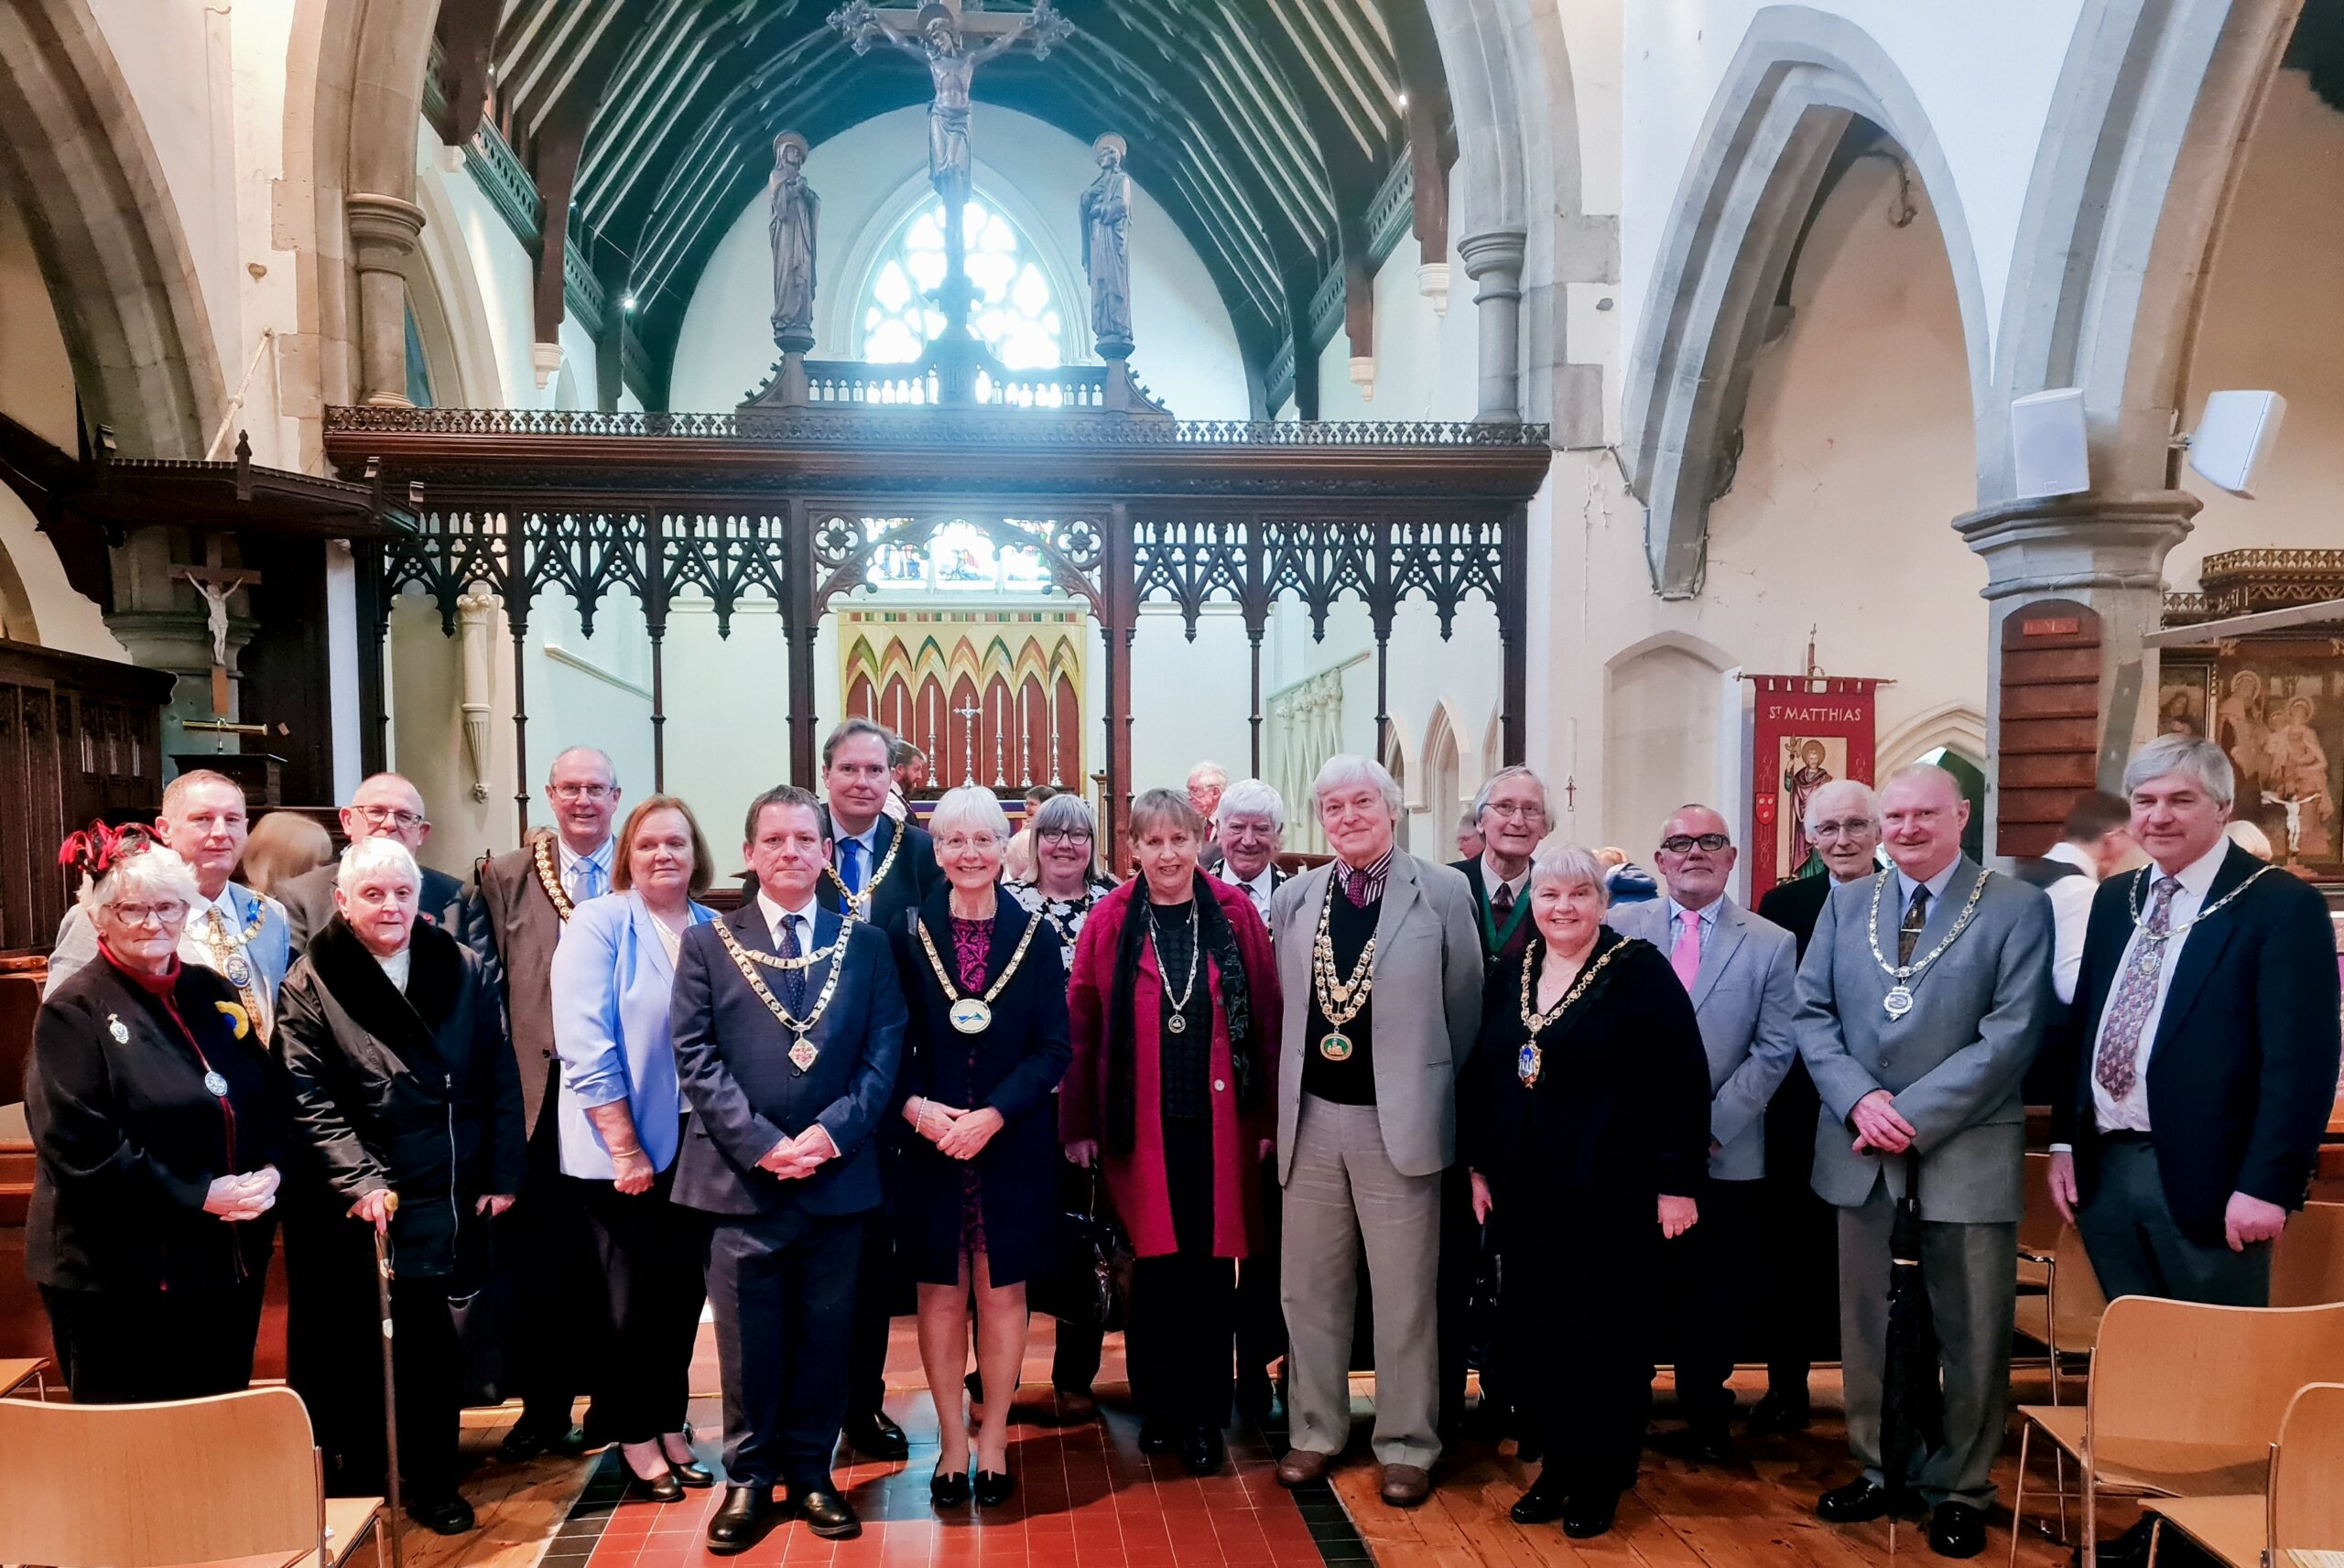 The civic service at The Church of St Matthias in Malvern Link